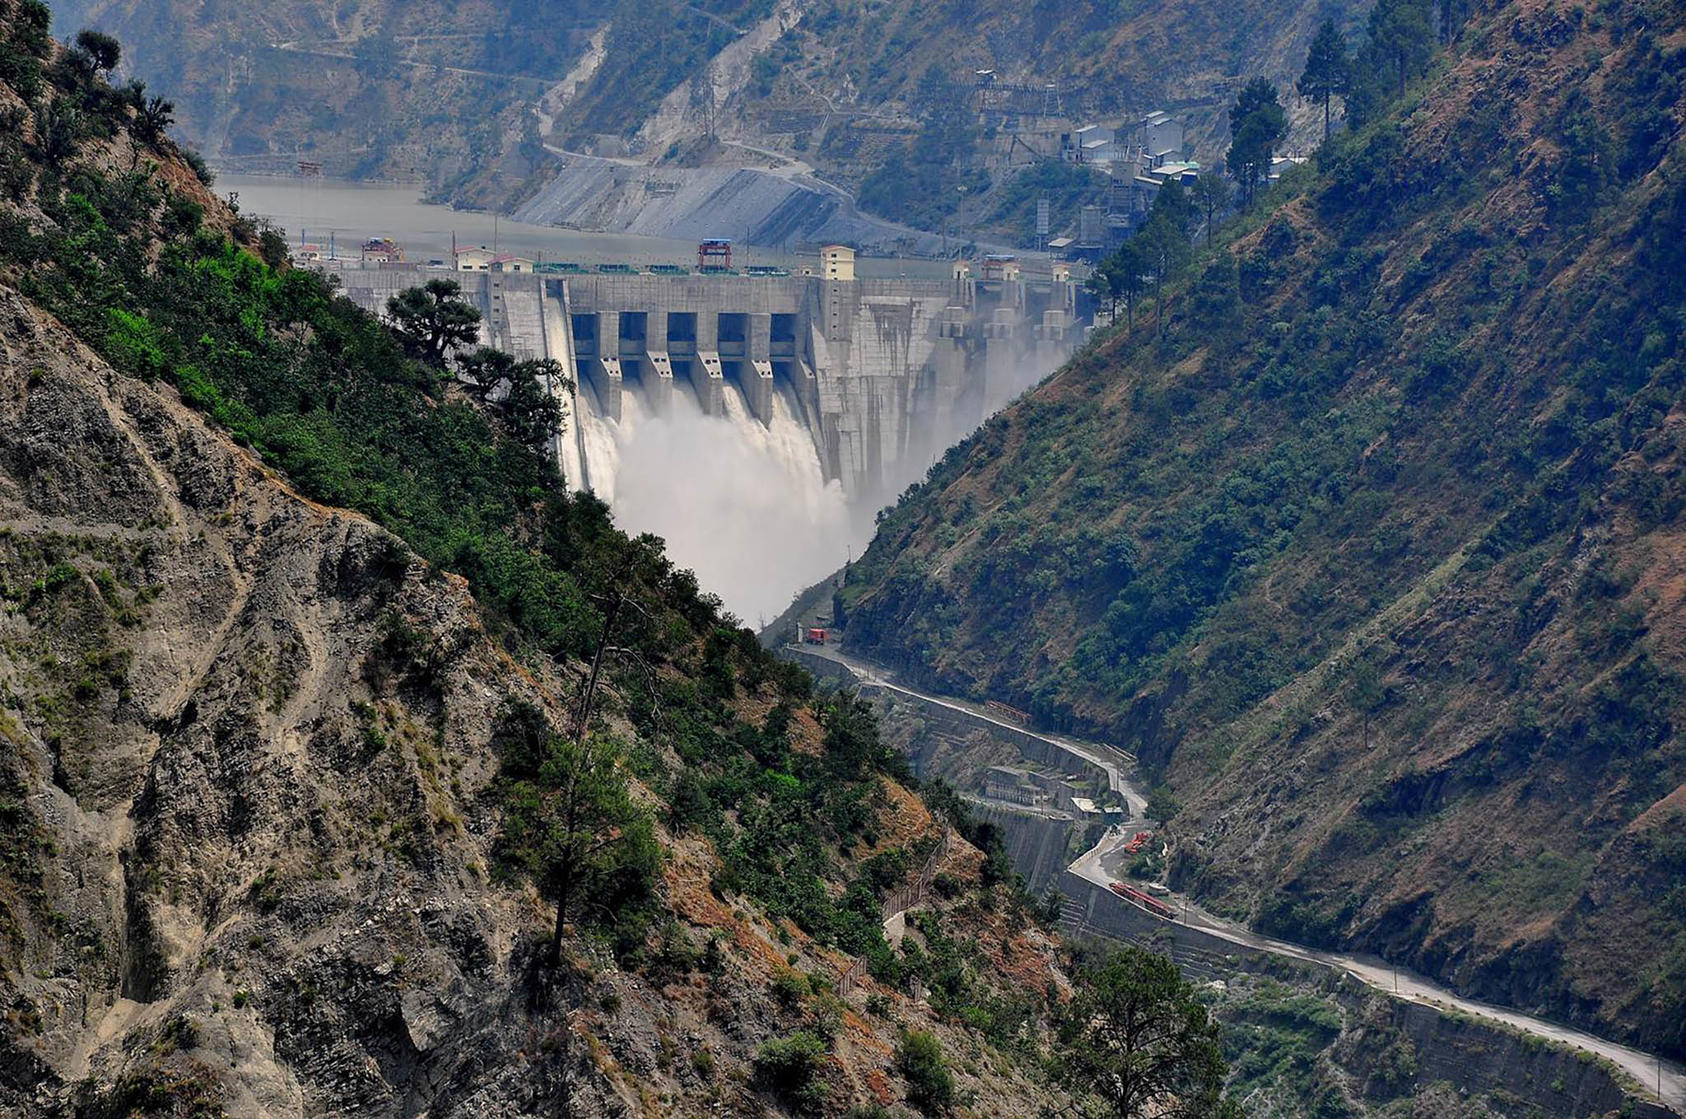 The Baglihar Hydroelectric Power Project on the Chenab River in Jammu and Kashmir, India. March 25, 2015. (International Centre for Integrated Mountain Development / Flickr)